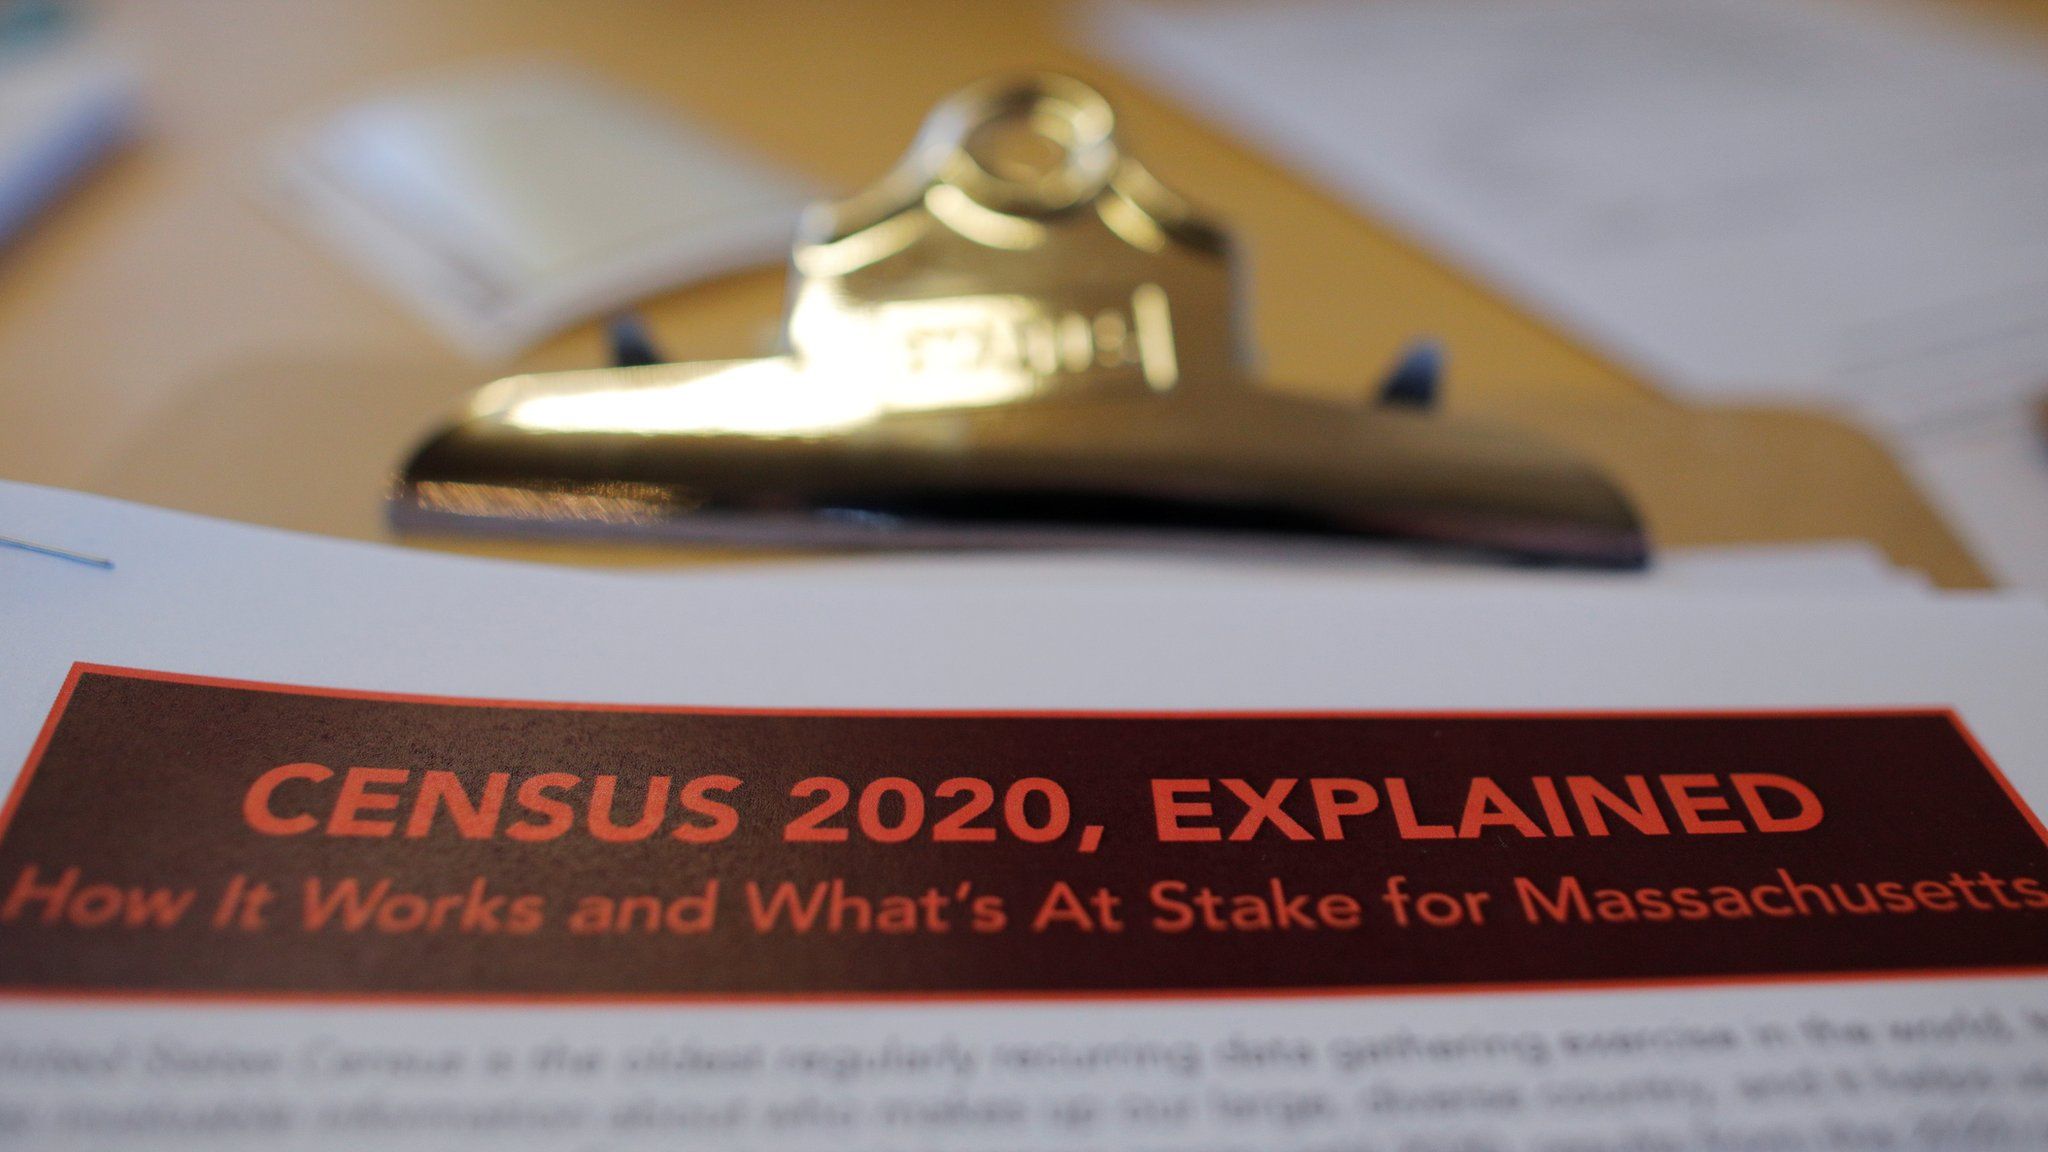 An informational pamphlet about the 2020 Census in Boston, Massachusetts